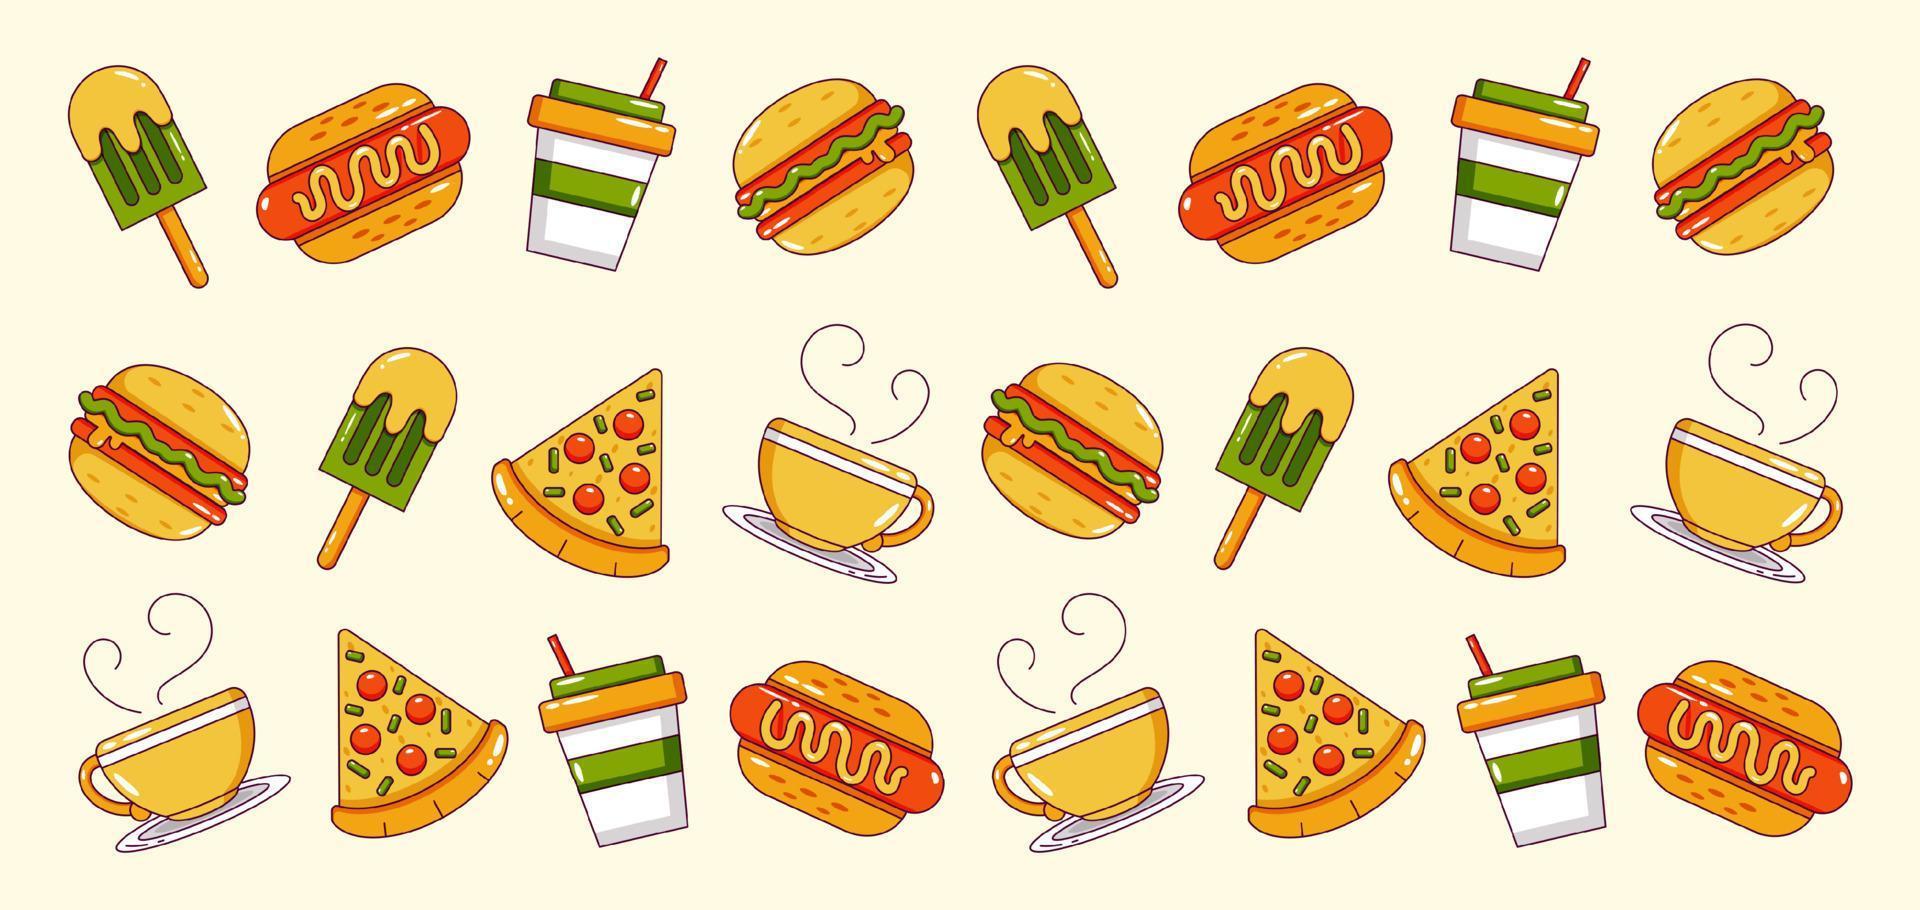 Food and Drink. Hotdog, burger, pizza, coffee and ice cream icon pattern vector